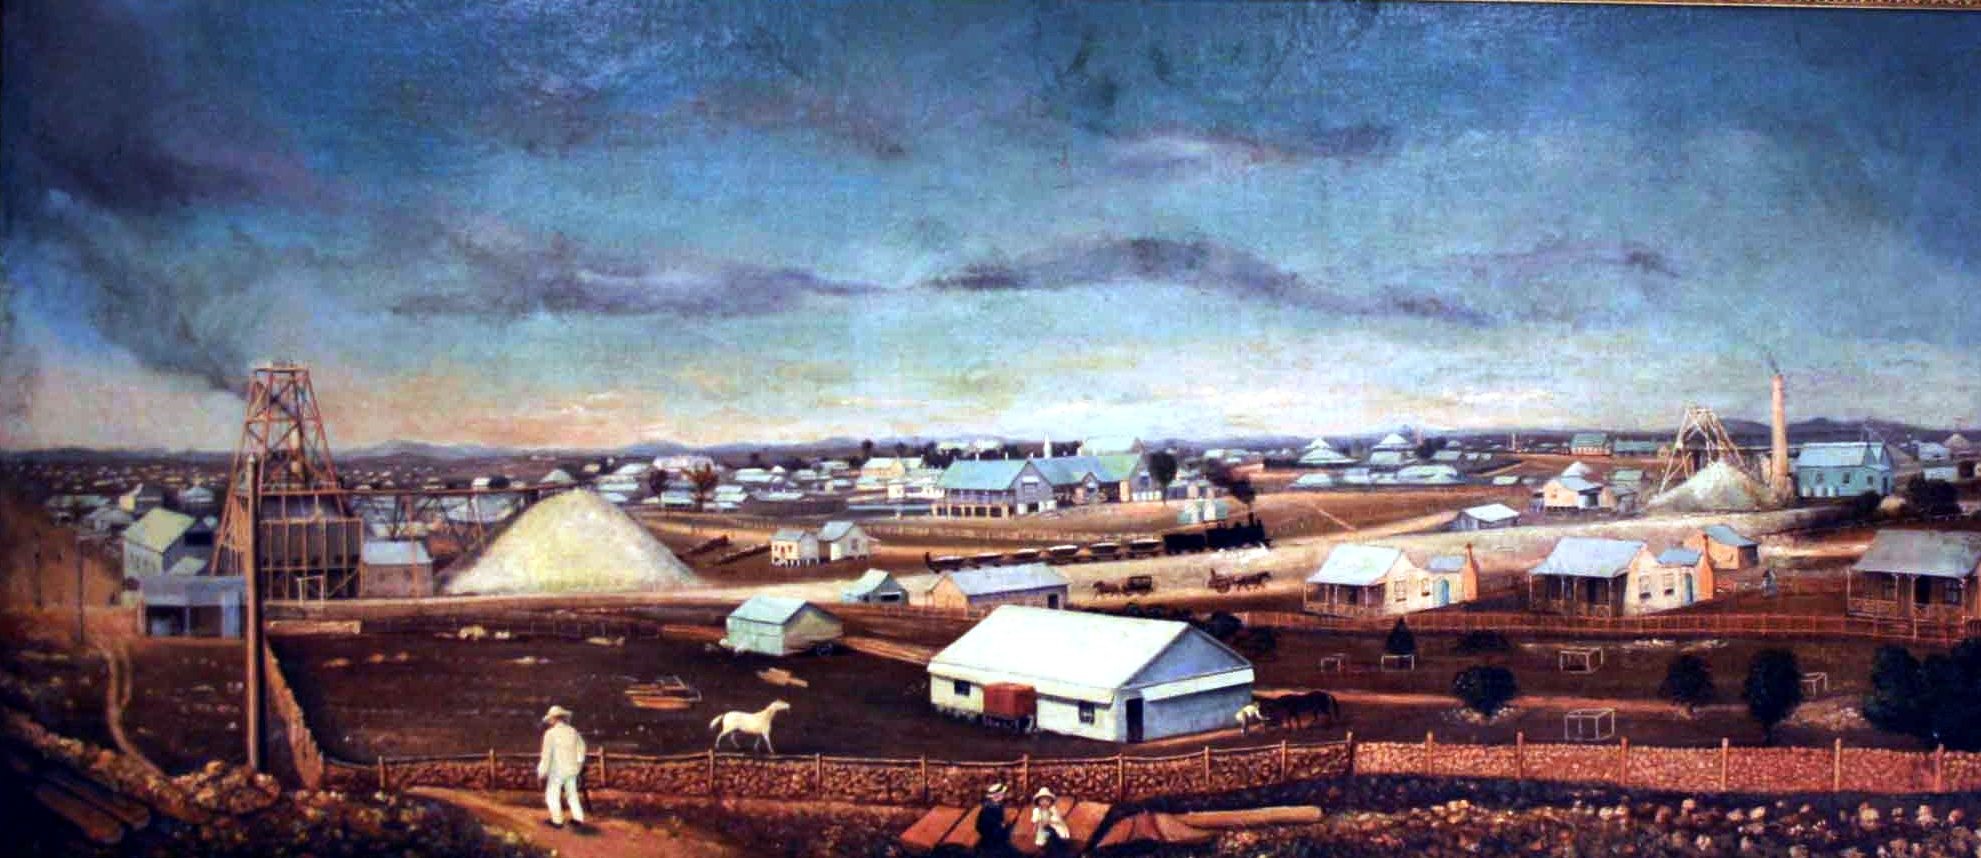 artwork dipicting early Charters Towers, Brown earth, white buildings, blue cloudy sky.